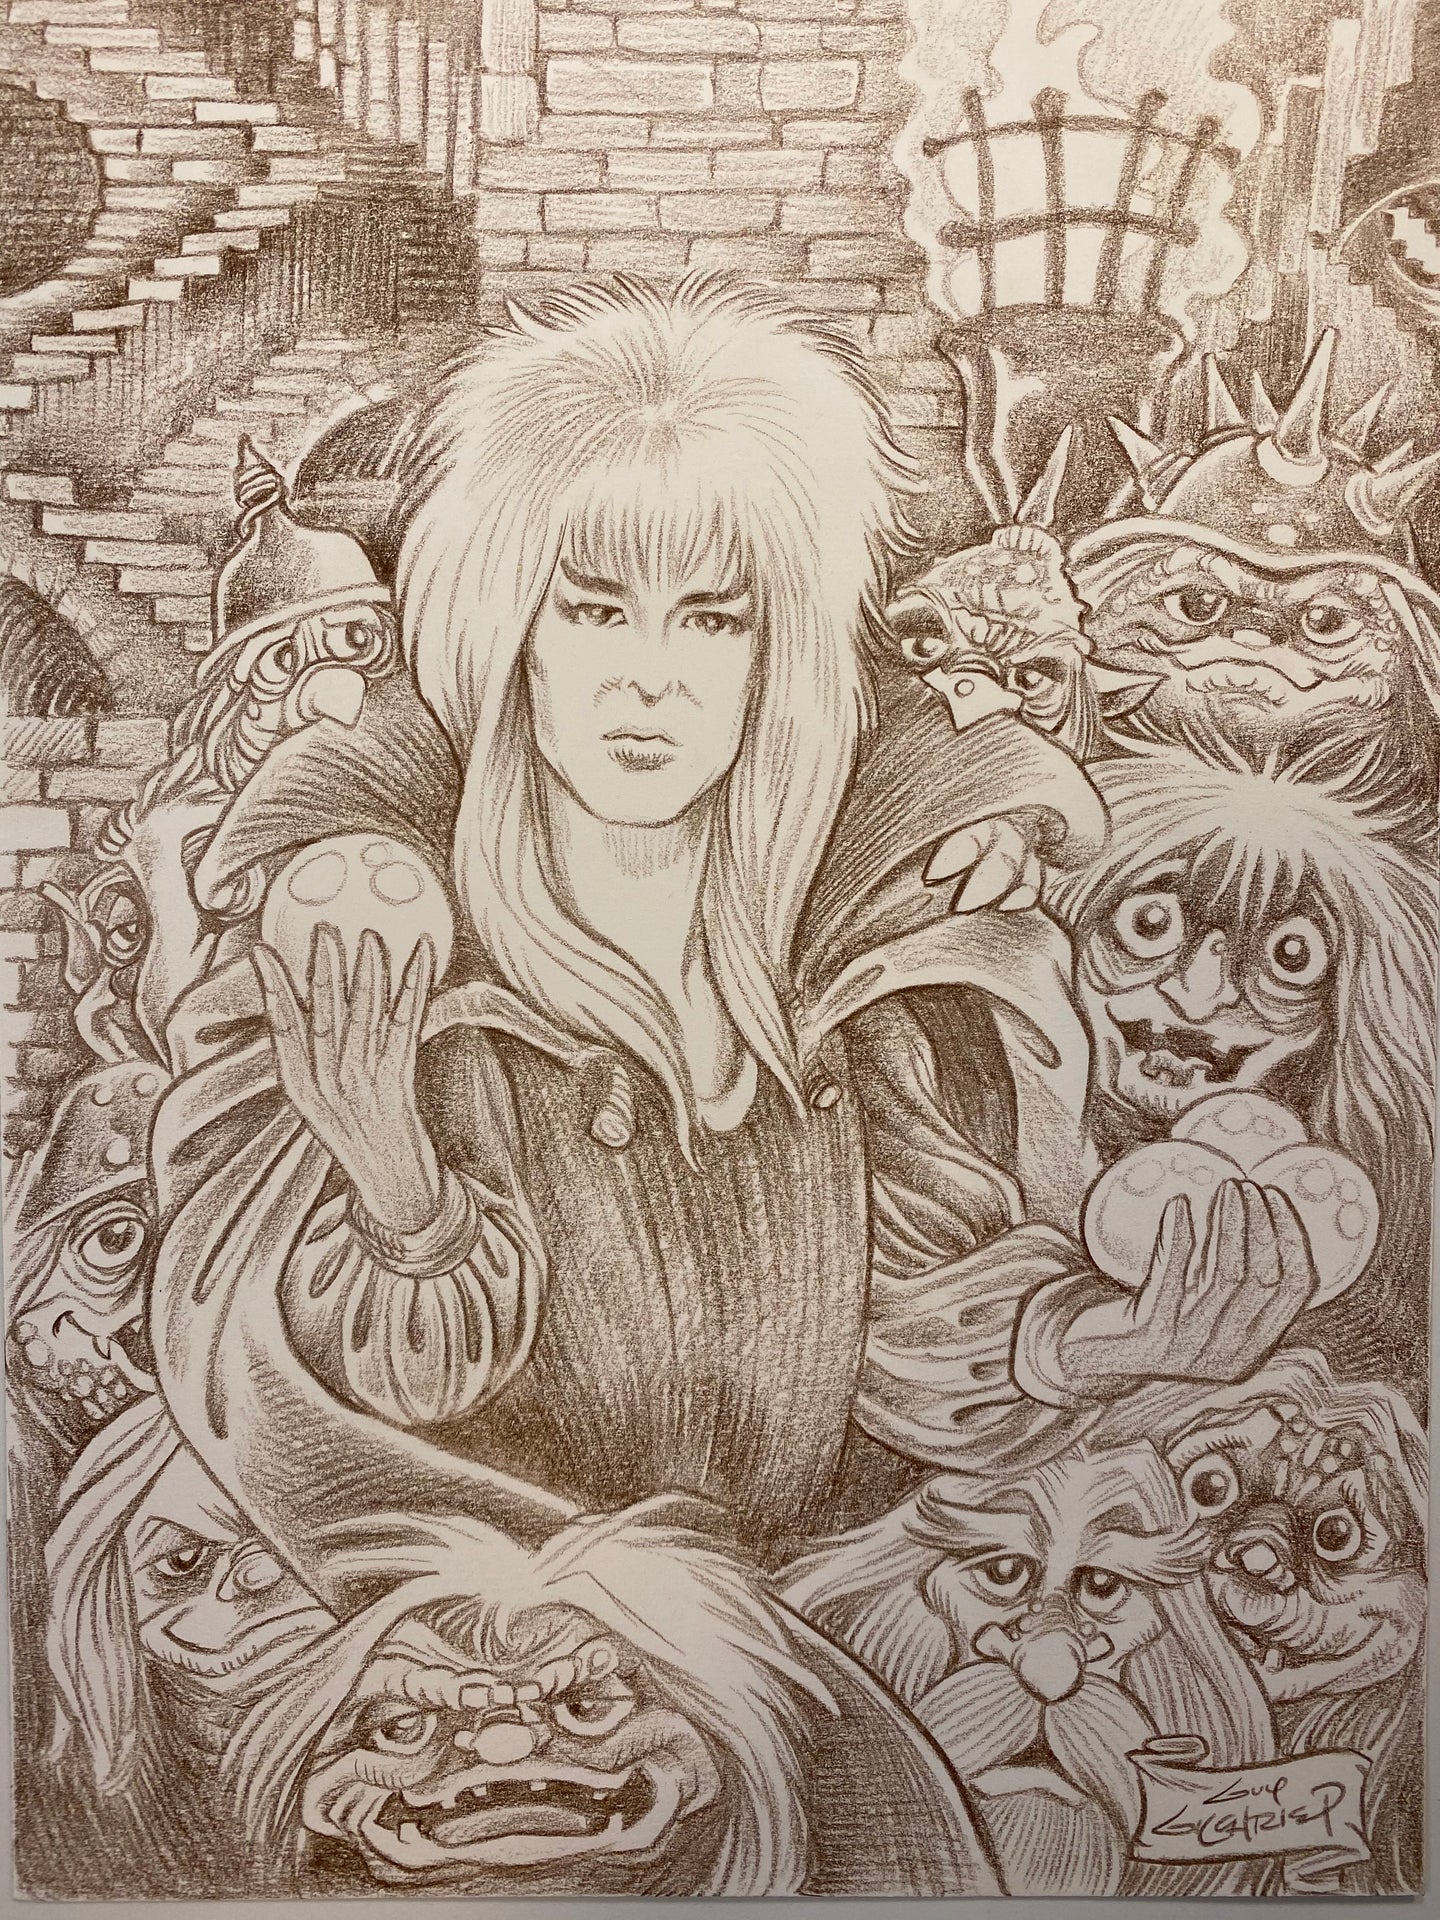 Jareth the Goblin King (Brown-Tones) 11x14 Art Print - Created by Guy Gilchrist